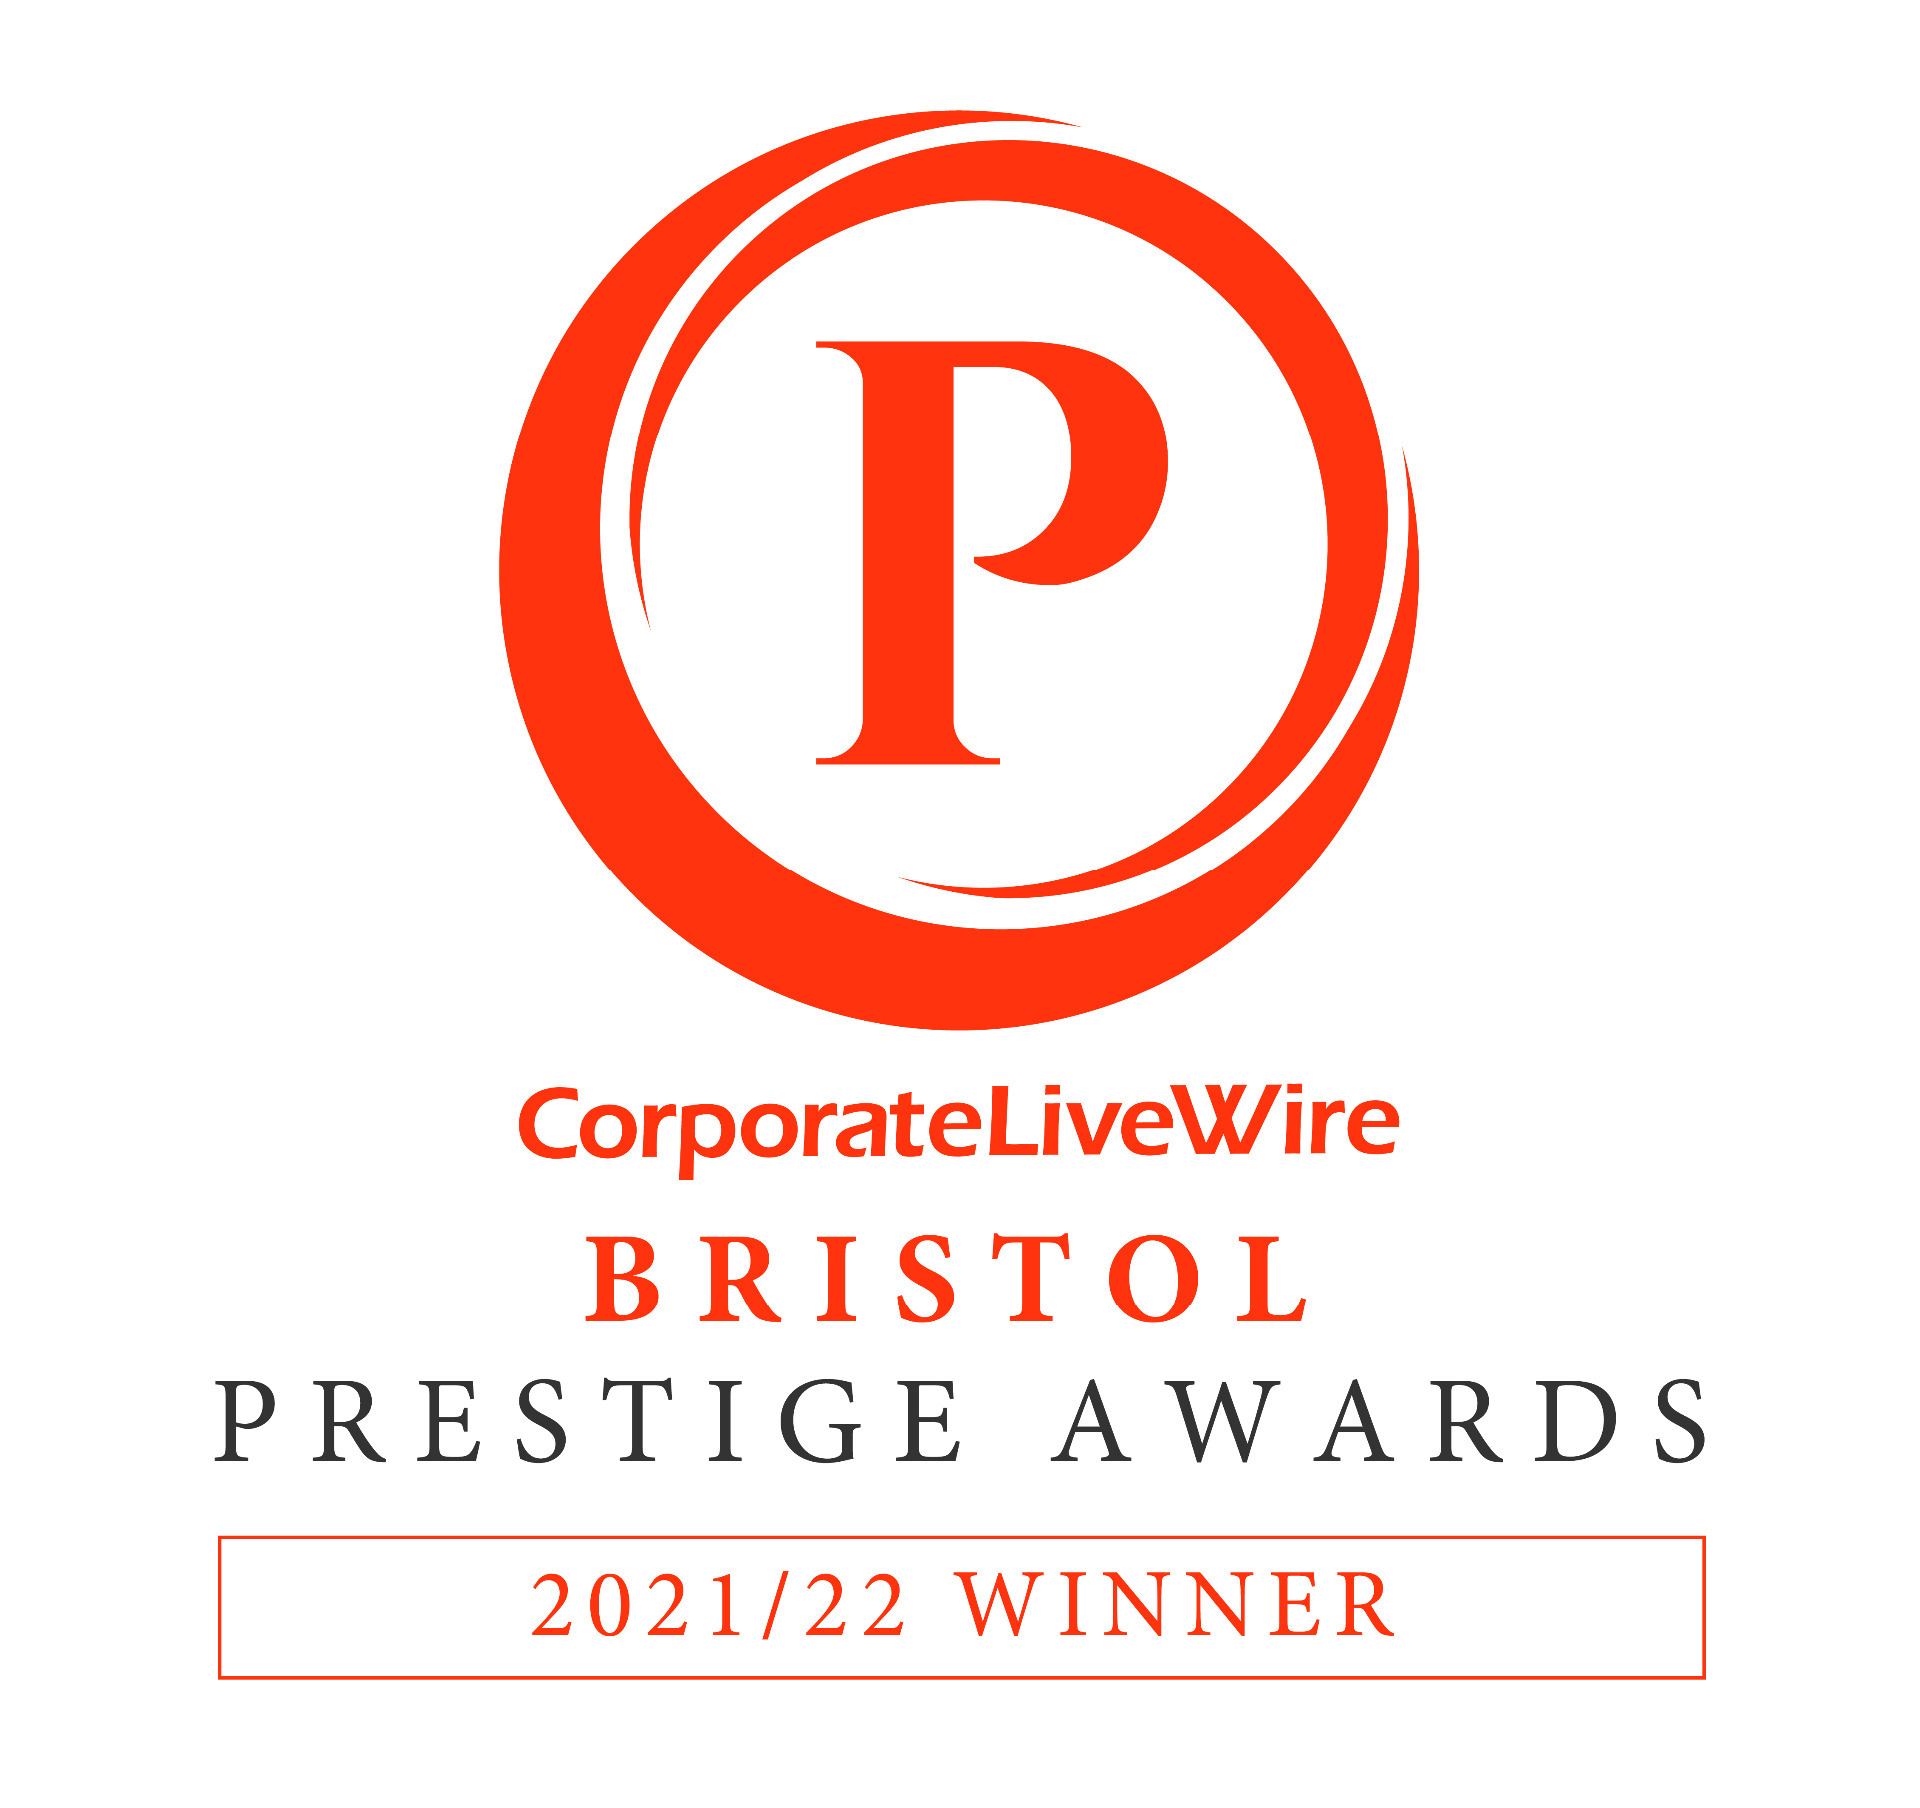 CorporateLiveWire awarded our Bristol Removal Company as 2021/22 Winner